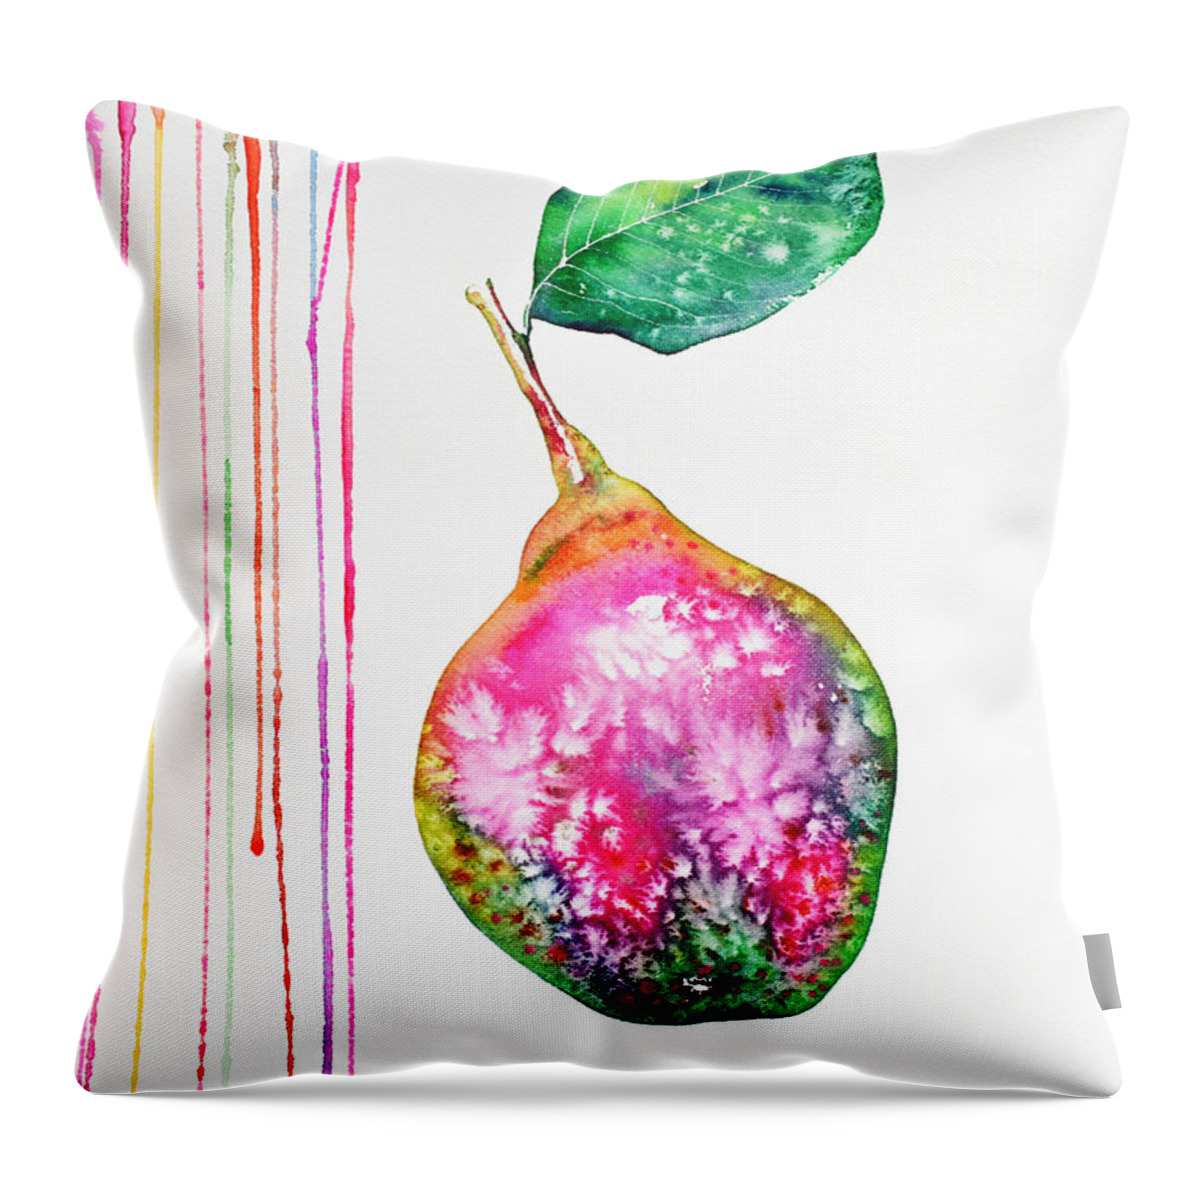 Pear Throw Pillow featuring the painting Colorful Pear by Zaira Dzhaubaeva